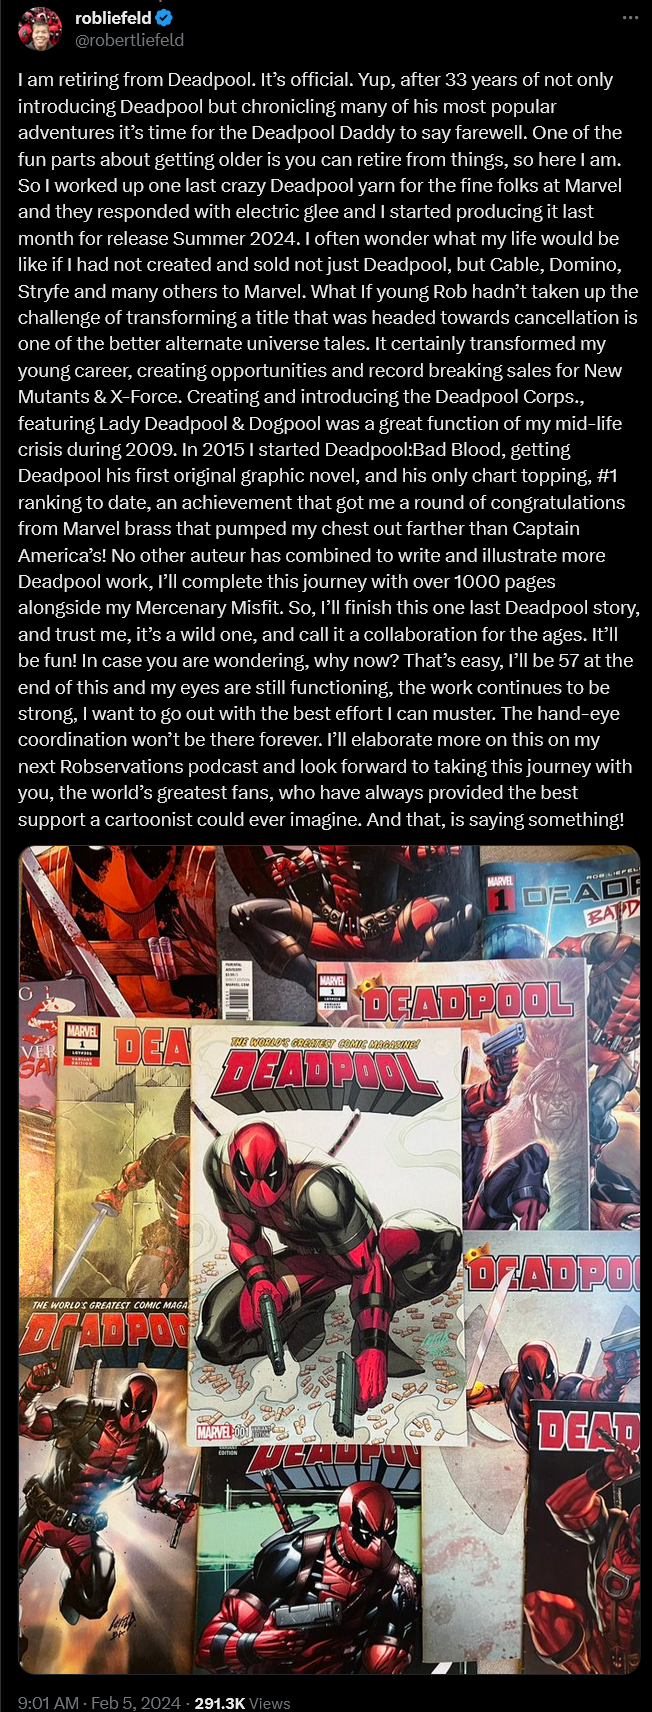 Rob Liefeld announces his retirement from working on Deadpool